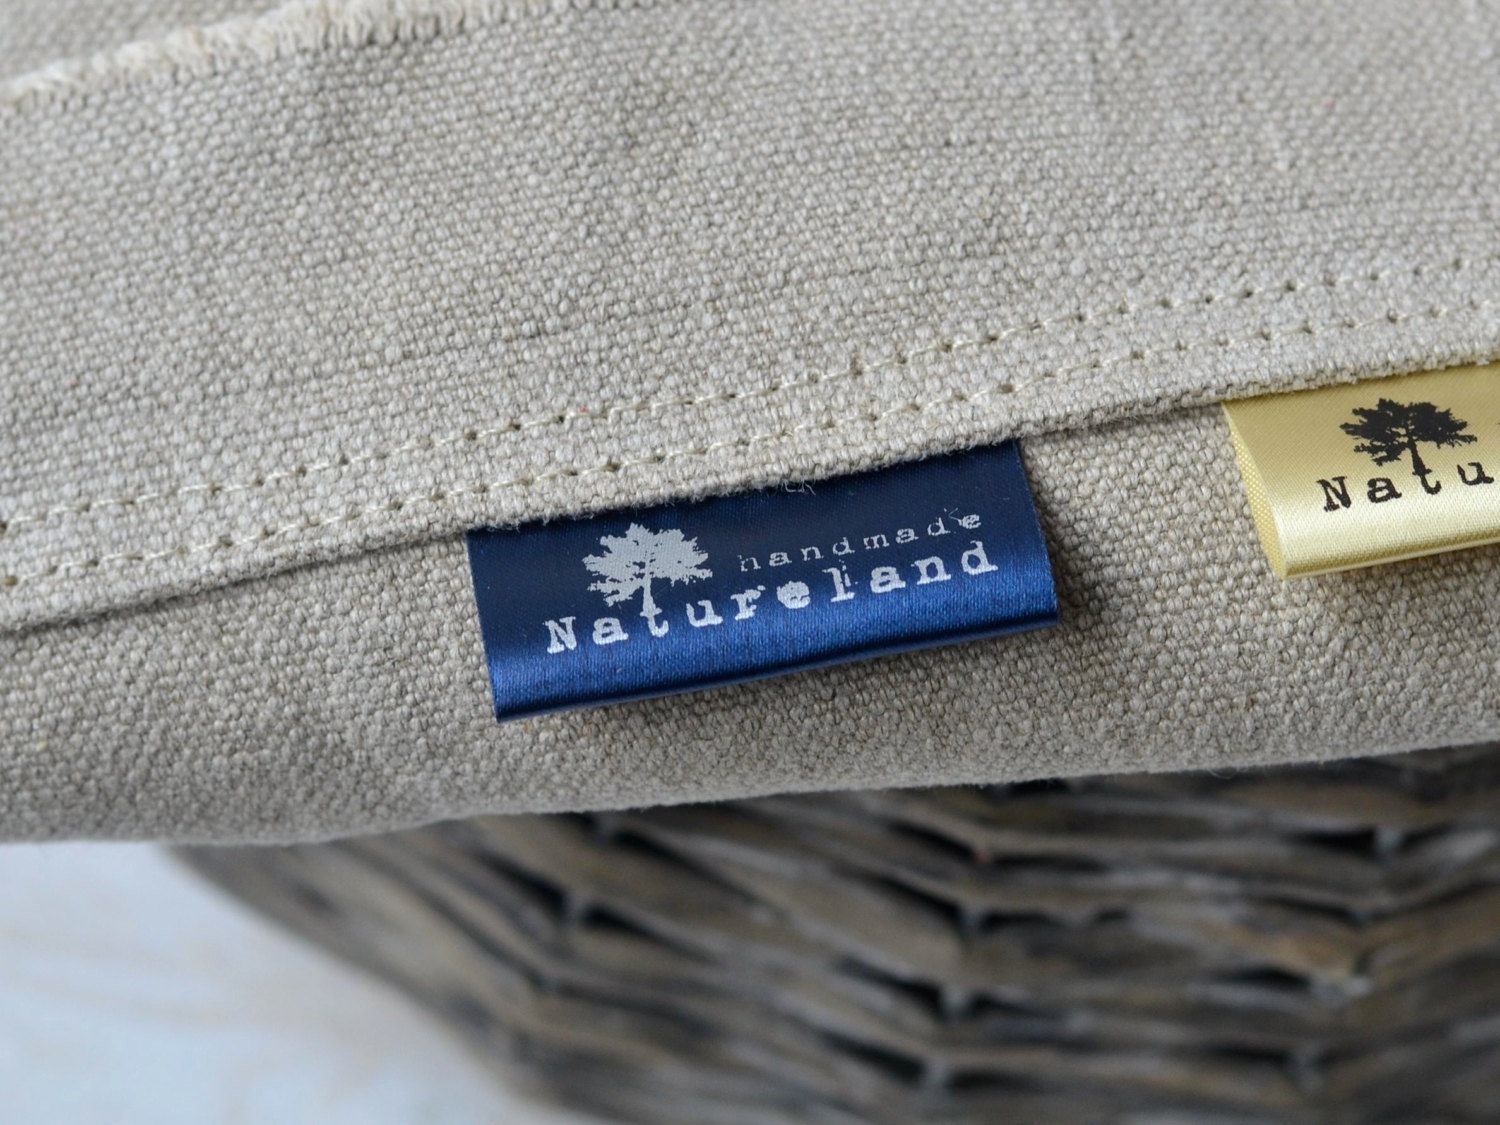 The Best Fabric Labels For Handmade Items | Hunting Handmade